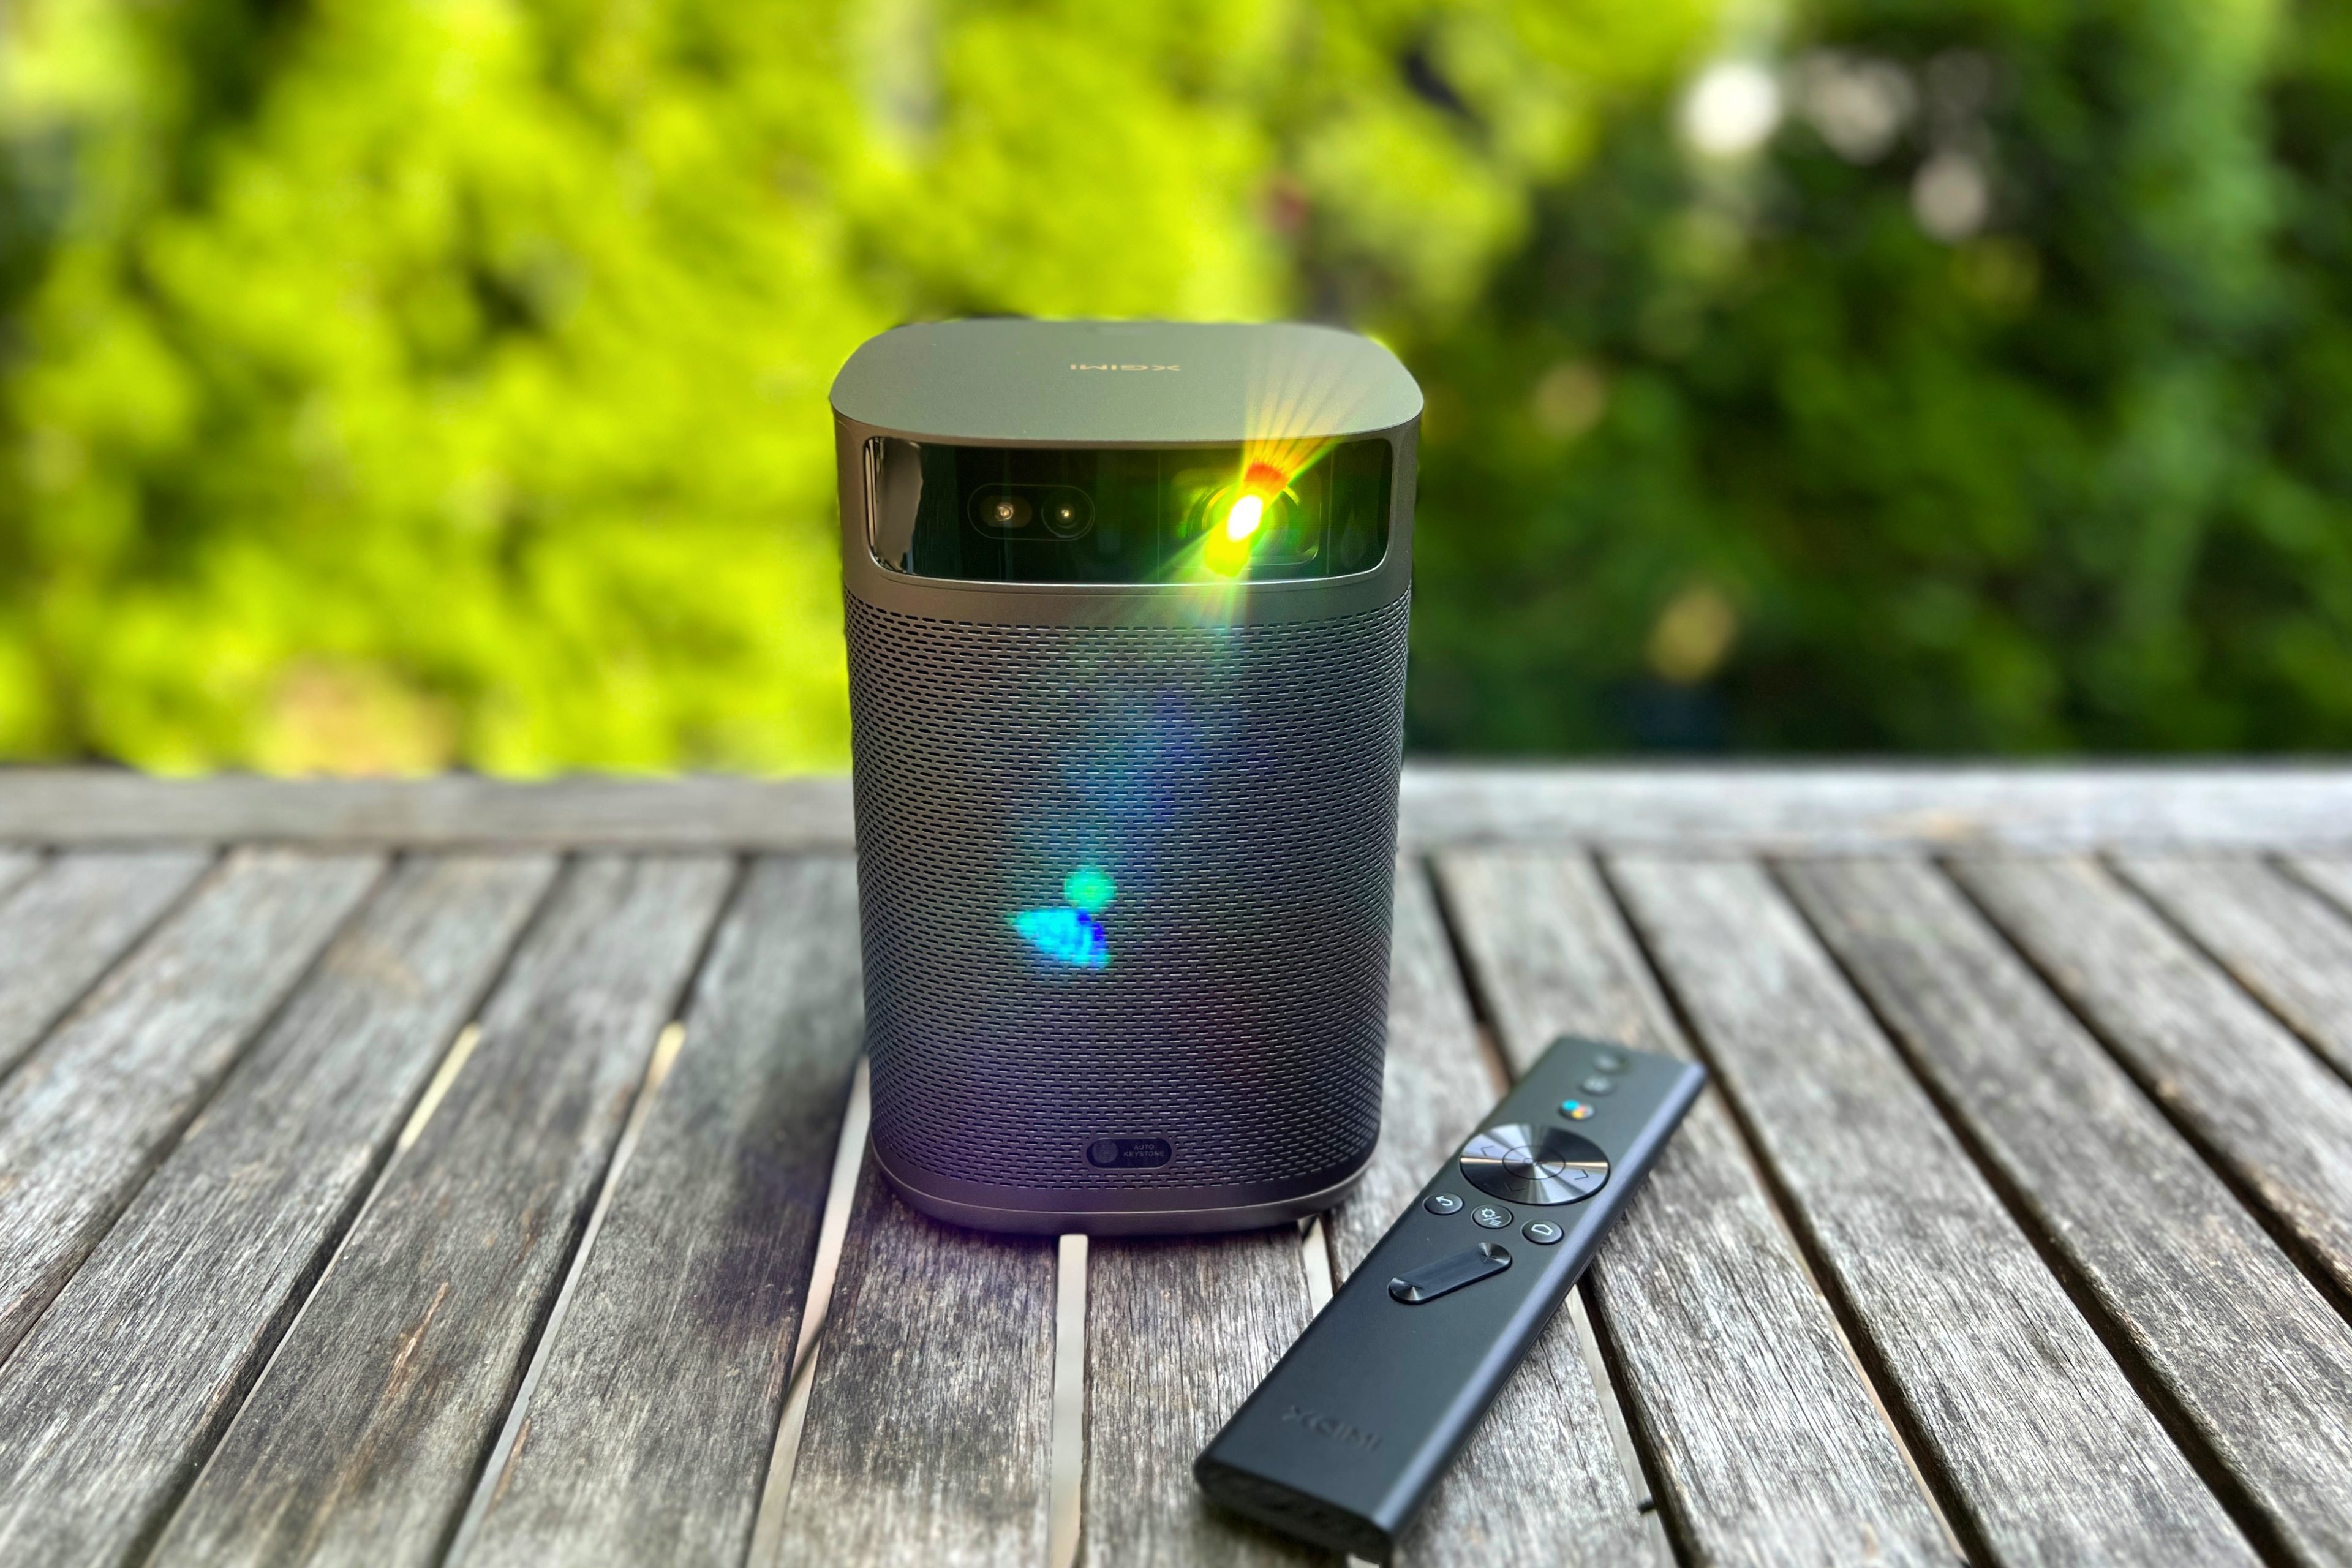 Digital Pro review: Xgimi Trends projector | a 2 TV MoGo mighty, mini Android